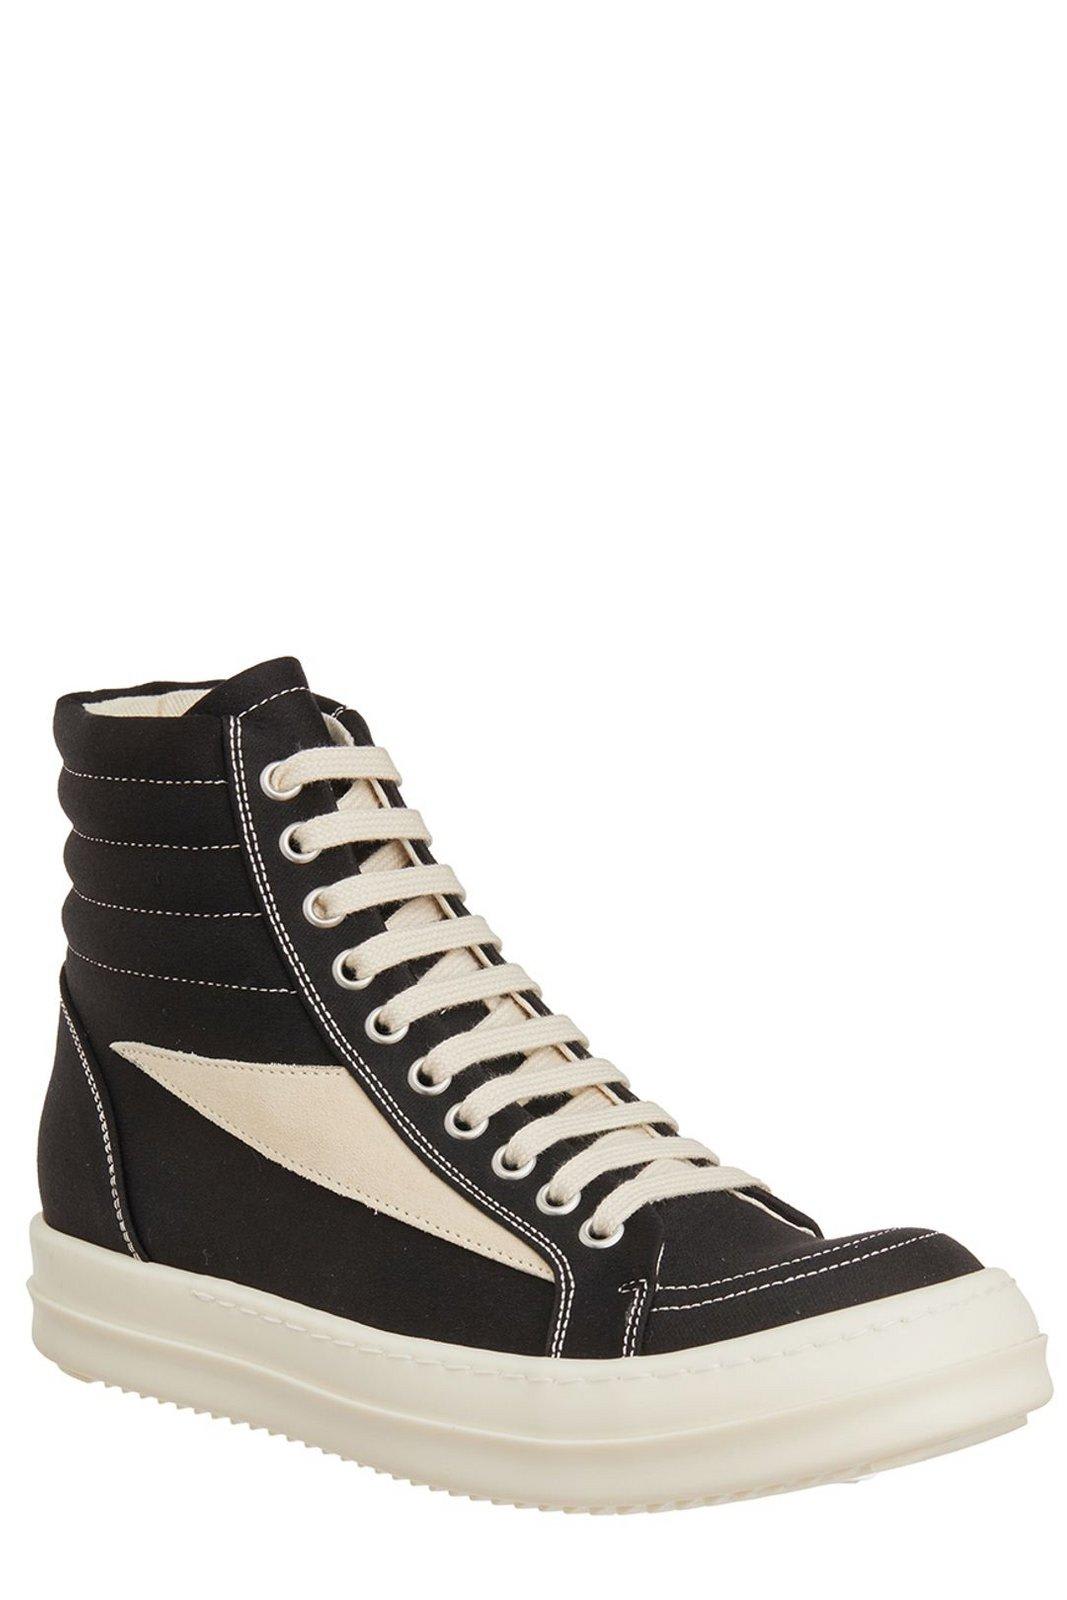 Shop Drkshdw High-top Lace-up Sneakers In Black